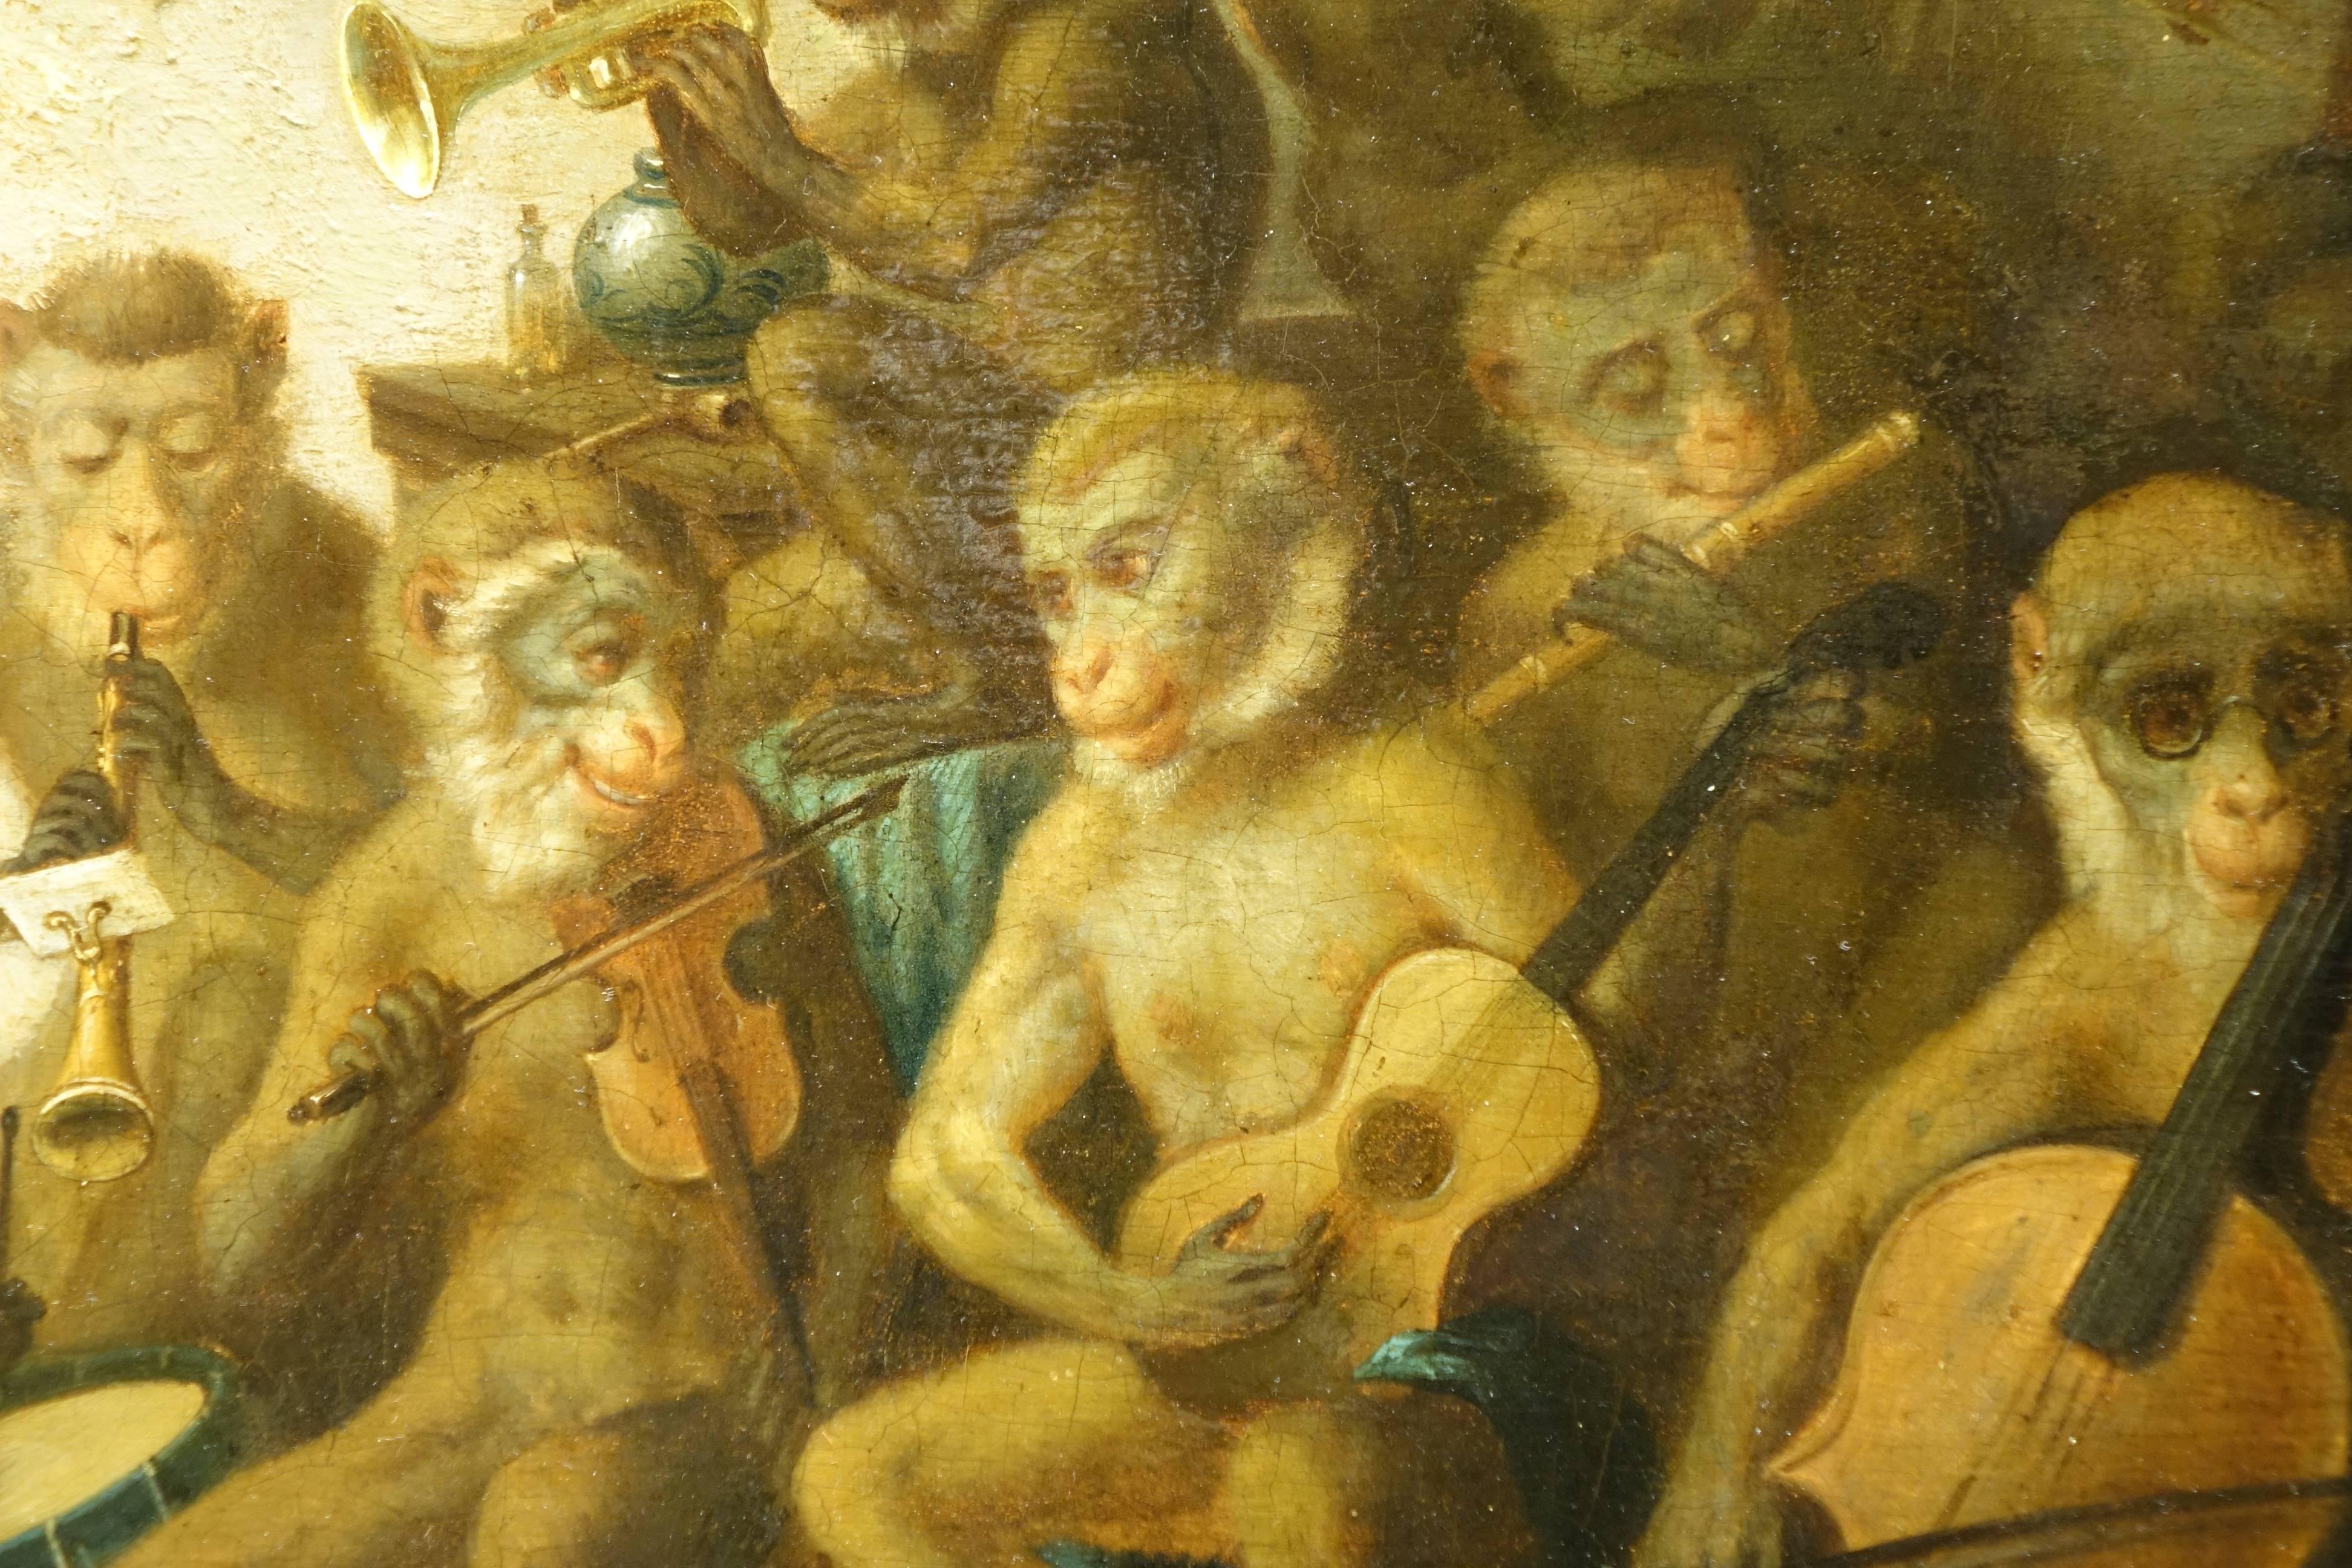 Orchestra of Monkeys, oil on panel,  circa 1850 French School
Eleven monkeys playing different instruments under the direction of one of them sitting in front of a window, France, circa 1850. 
Oil on panel reinforced at the back by wood cross